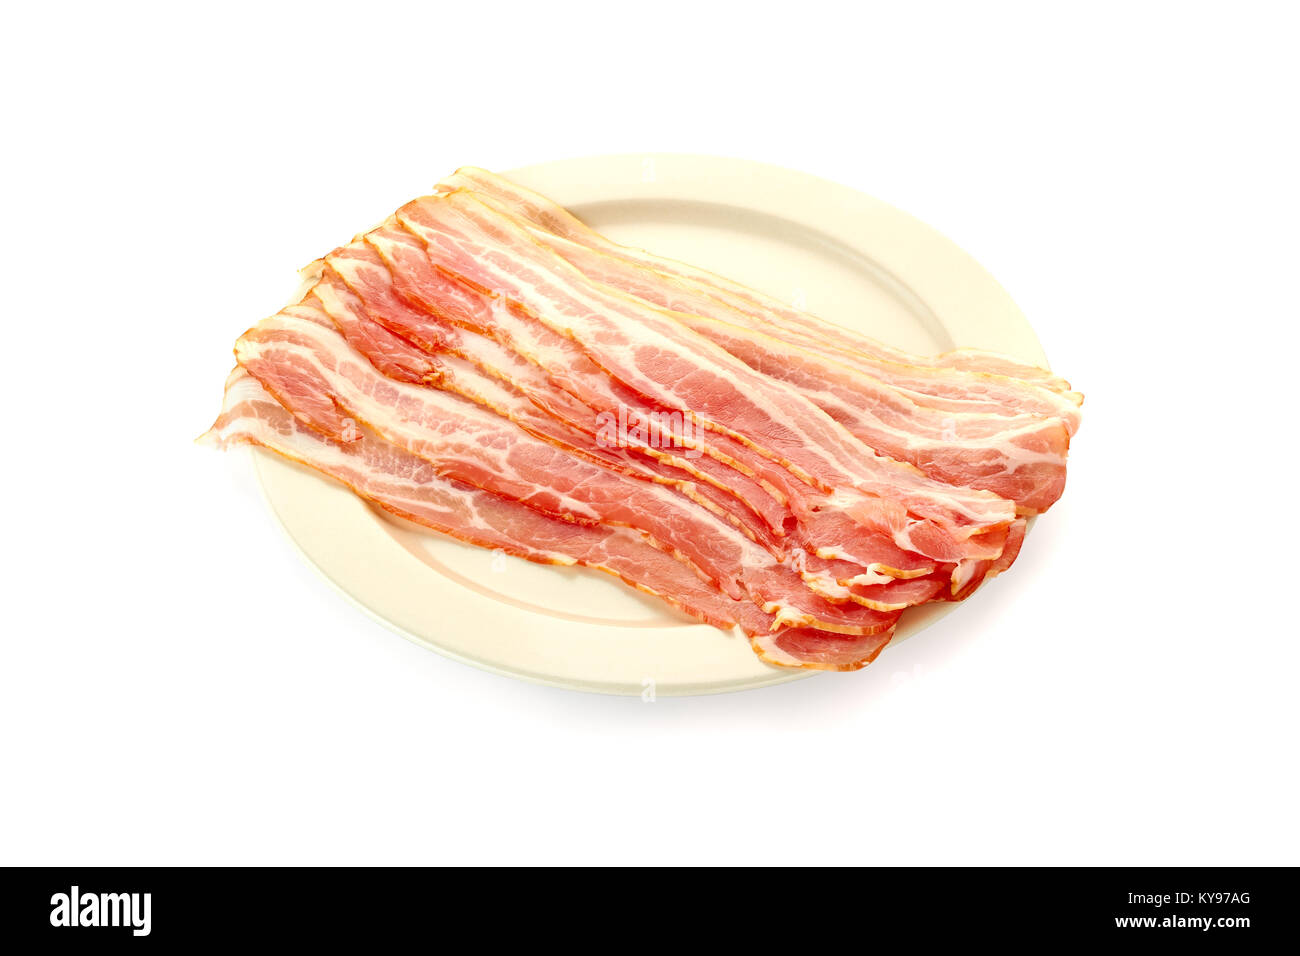 Dish with bacon on white Stock Photo